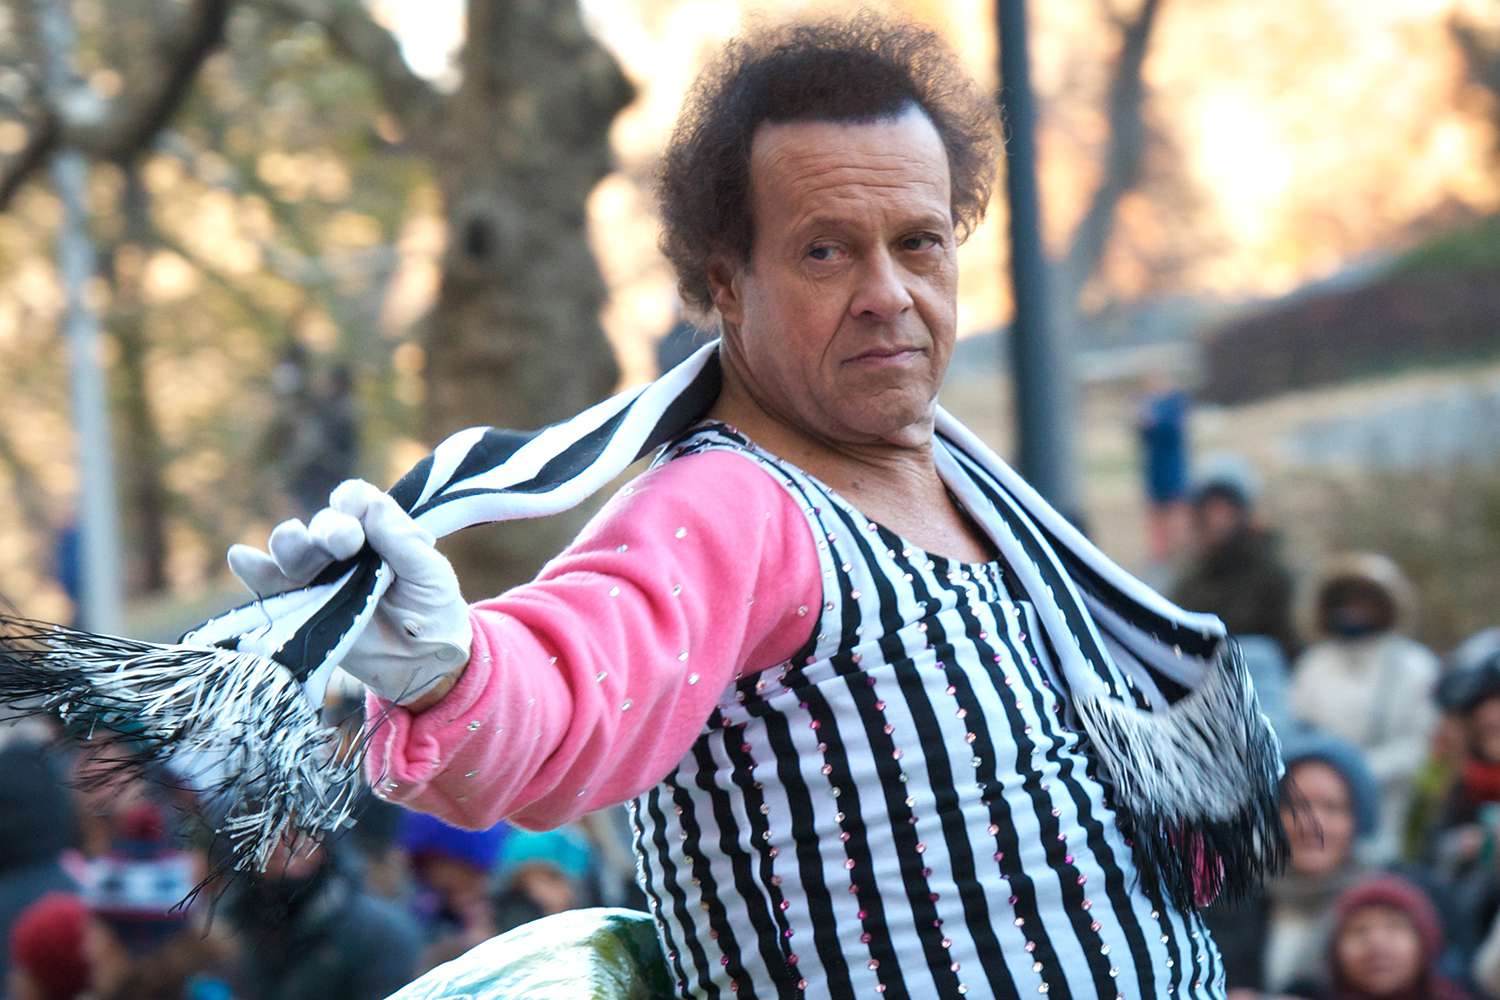 Richard Simmons’ Brother Says He Doesn’t ‘Want People to Be Sad’ About Fitness Guru’s Death: ‘Celebrate His Life...